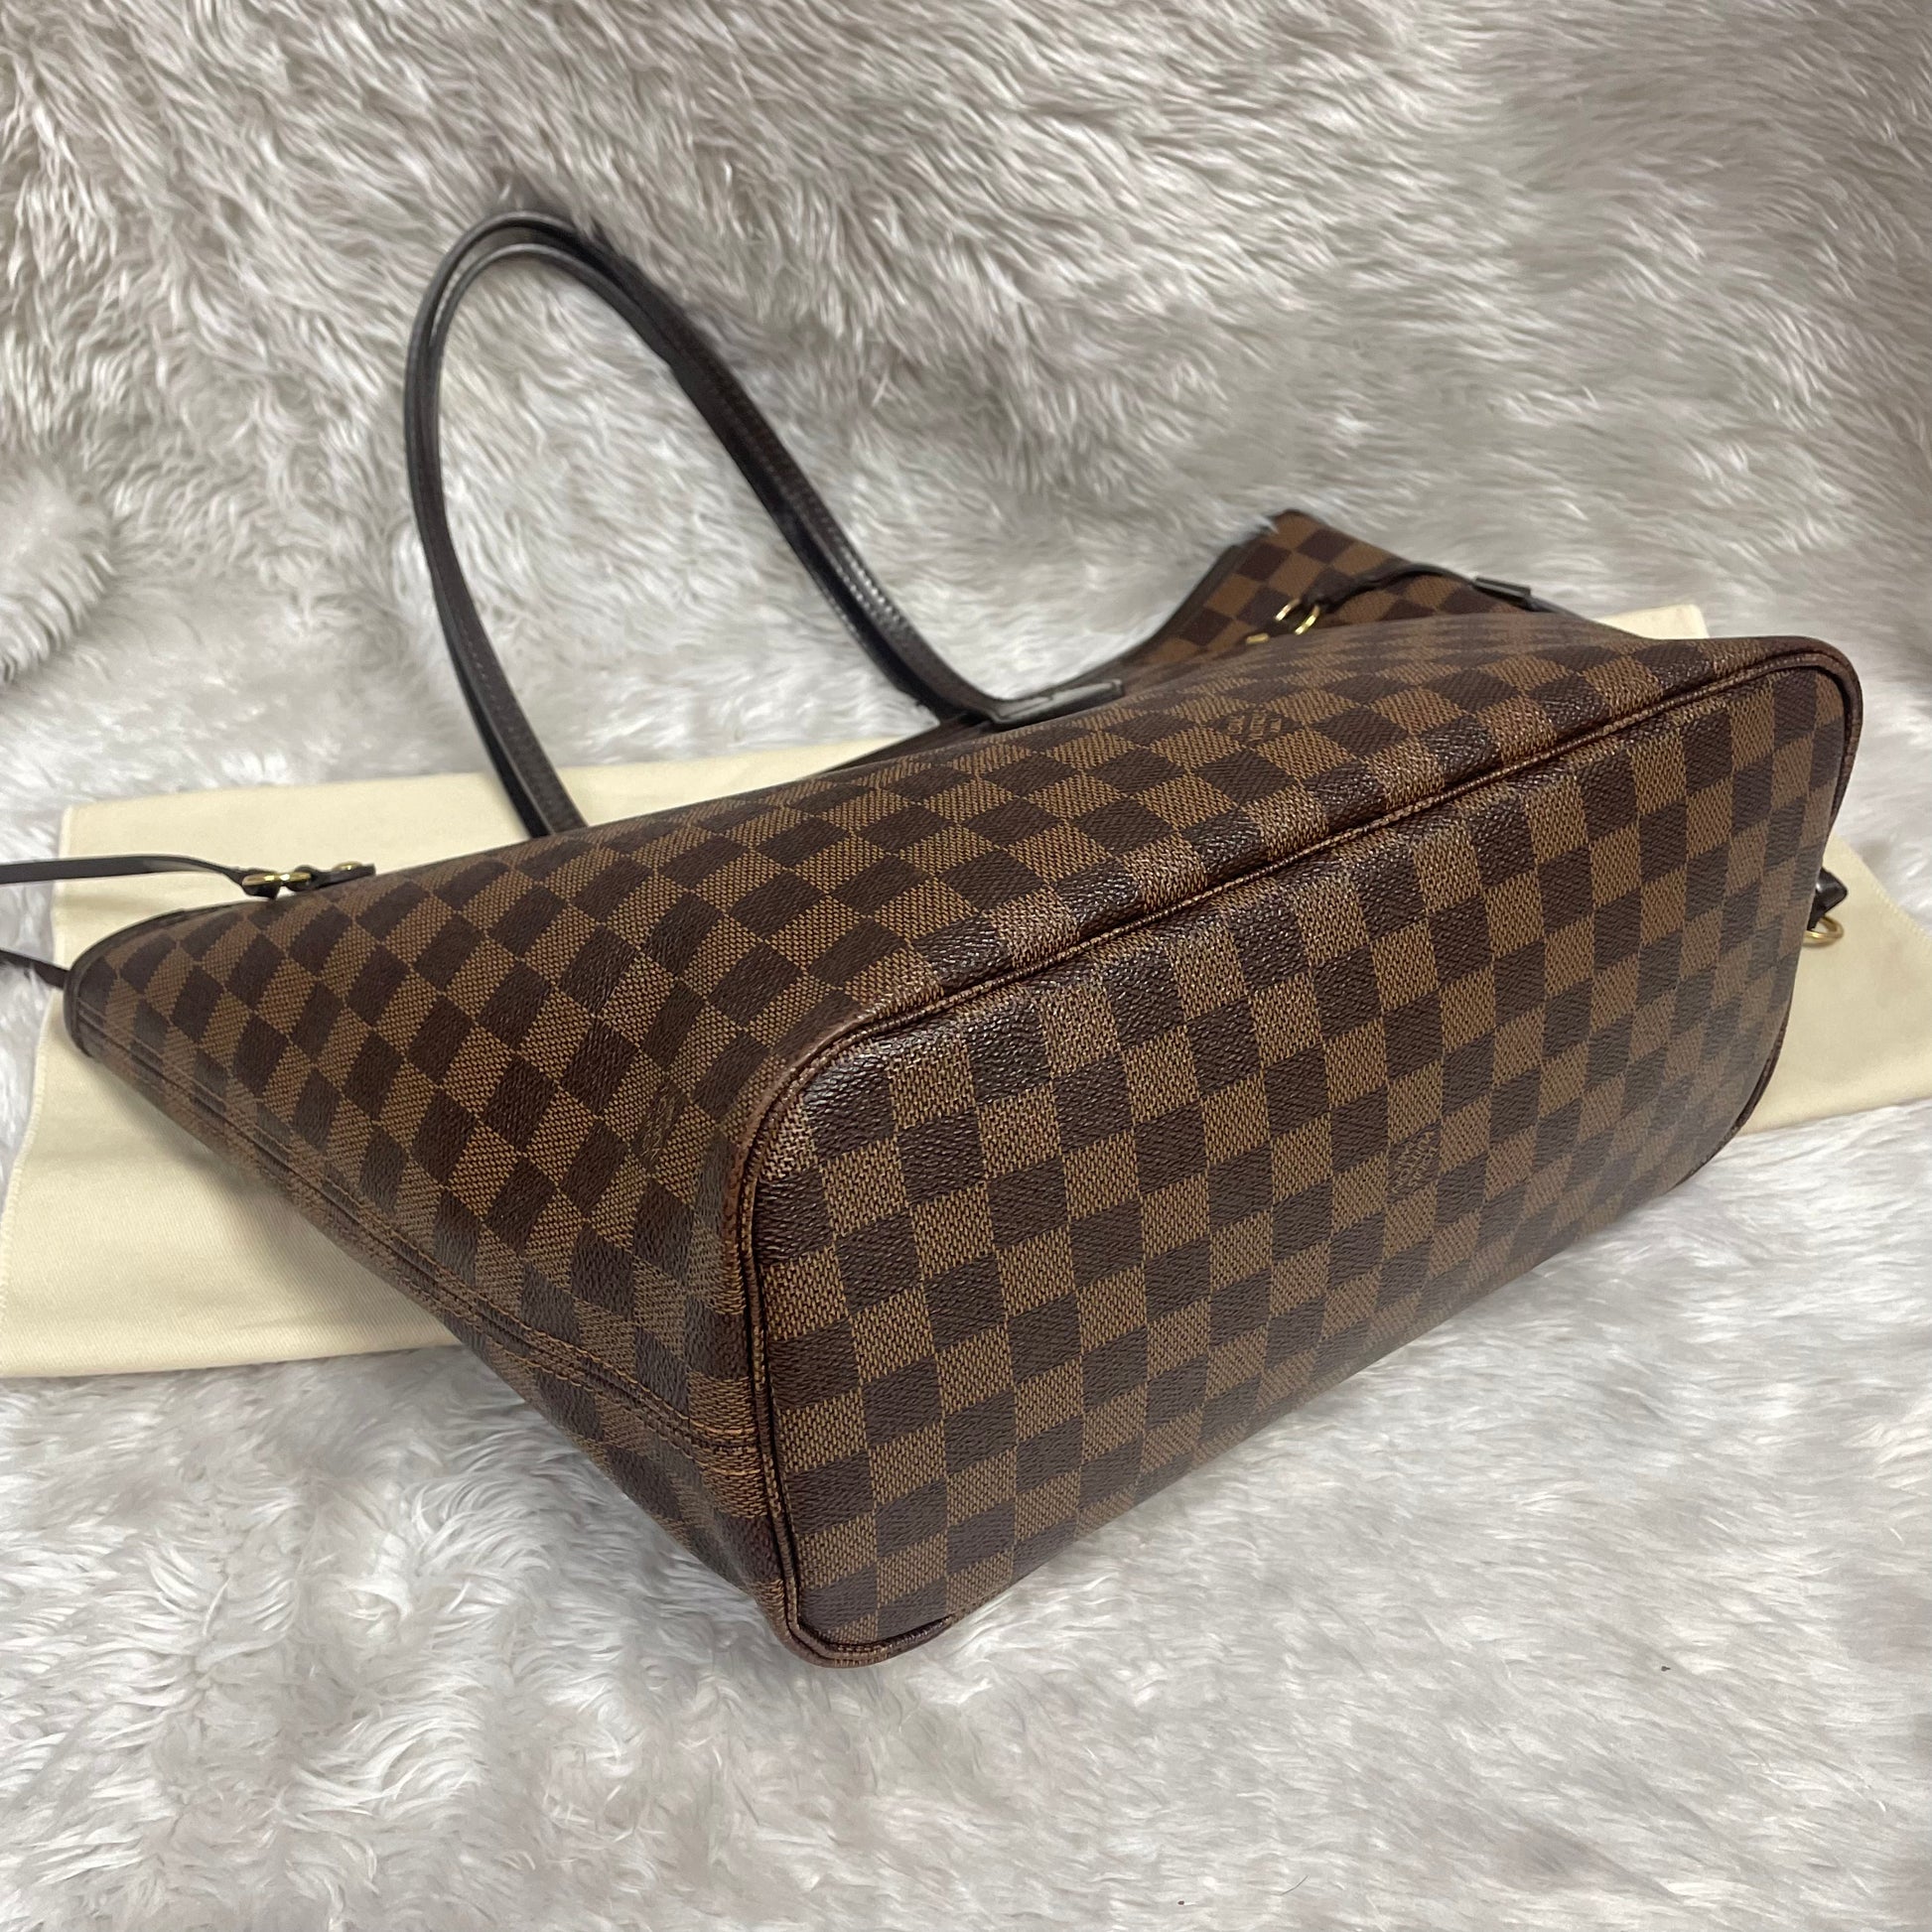 Authentic Neverfull mm damier ebene in very great condition!!! (GI4153 –  MKS BRAND